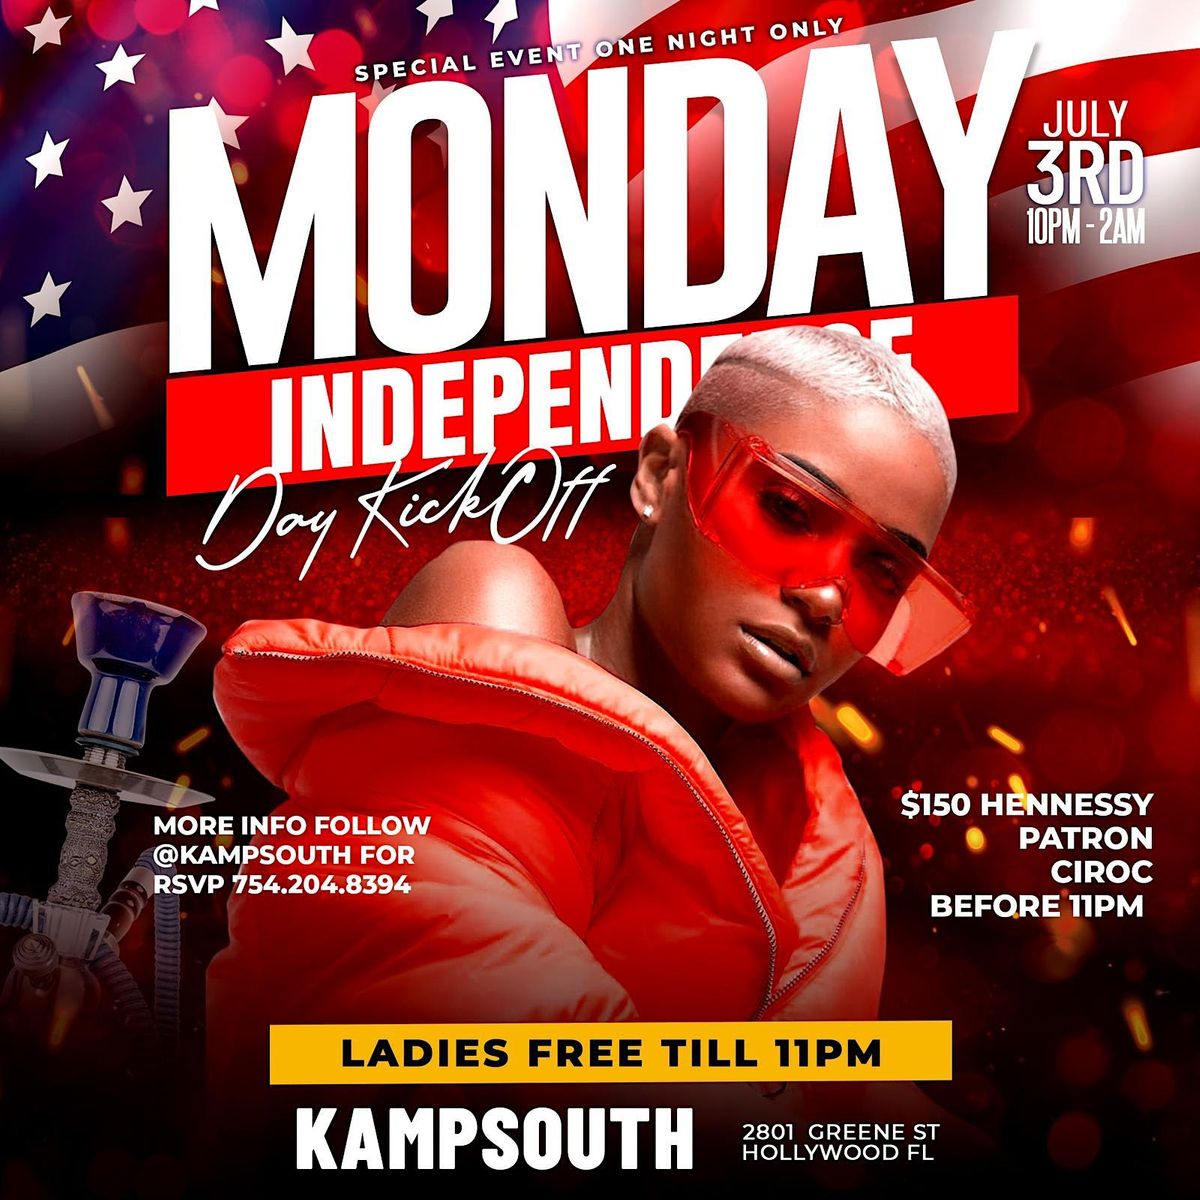 KampSouth Monday July 3rd! Independence Day Kickoff! 2801 Greene St